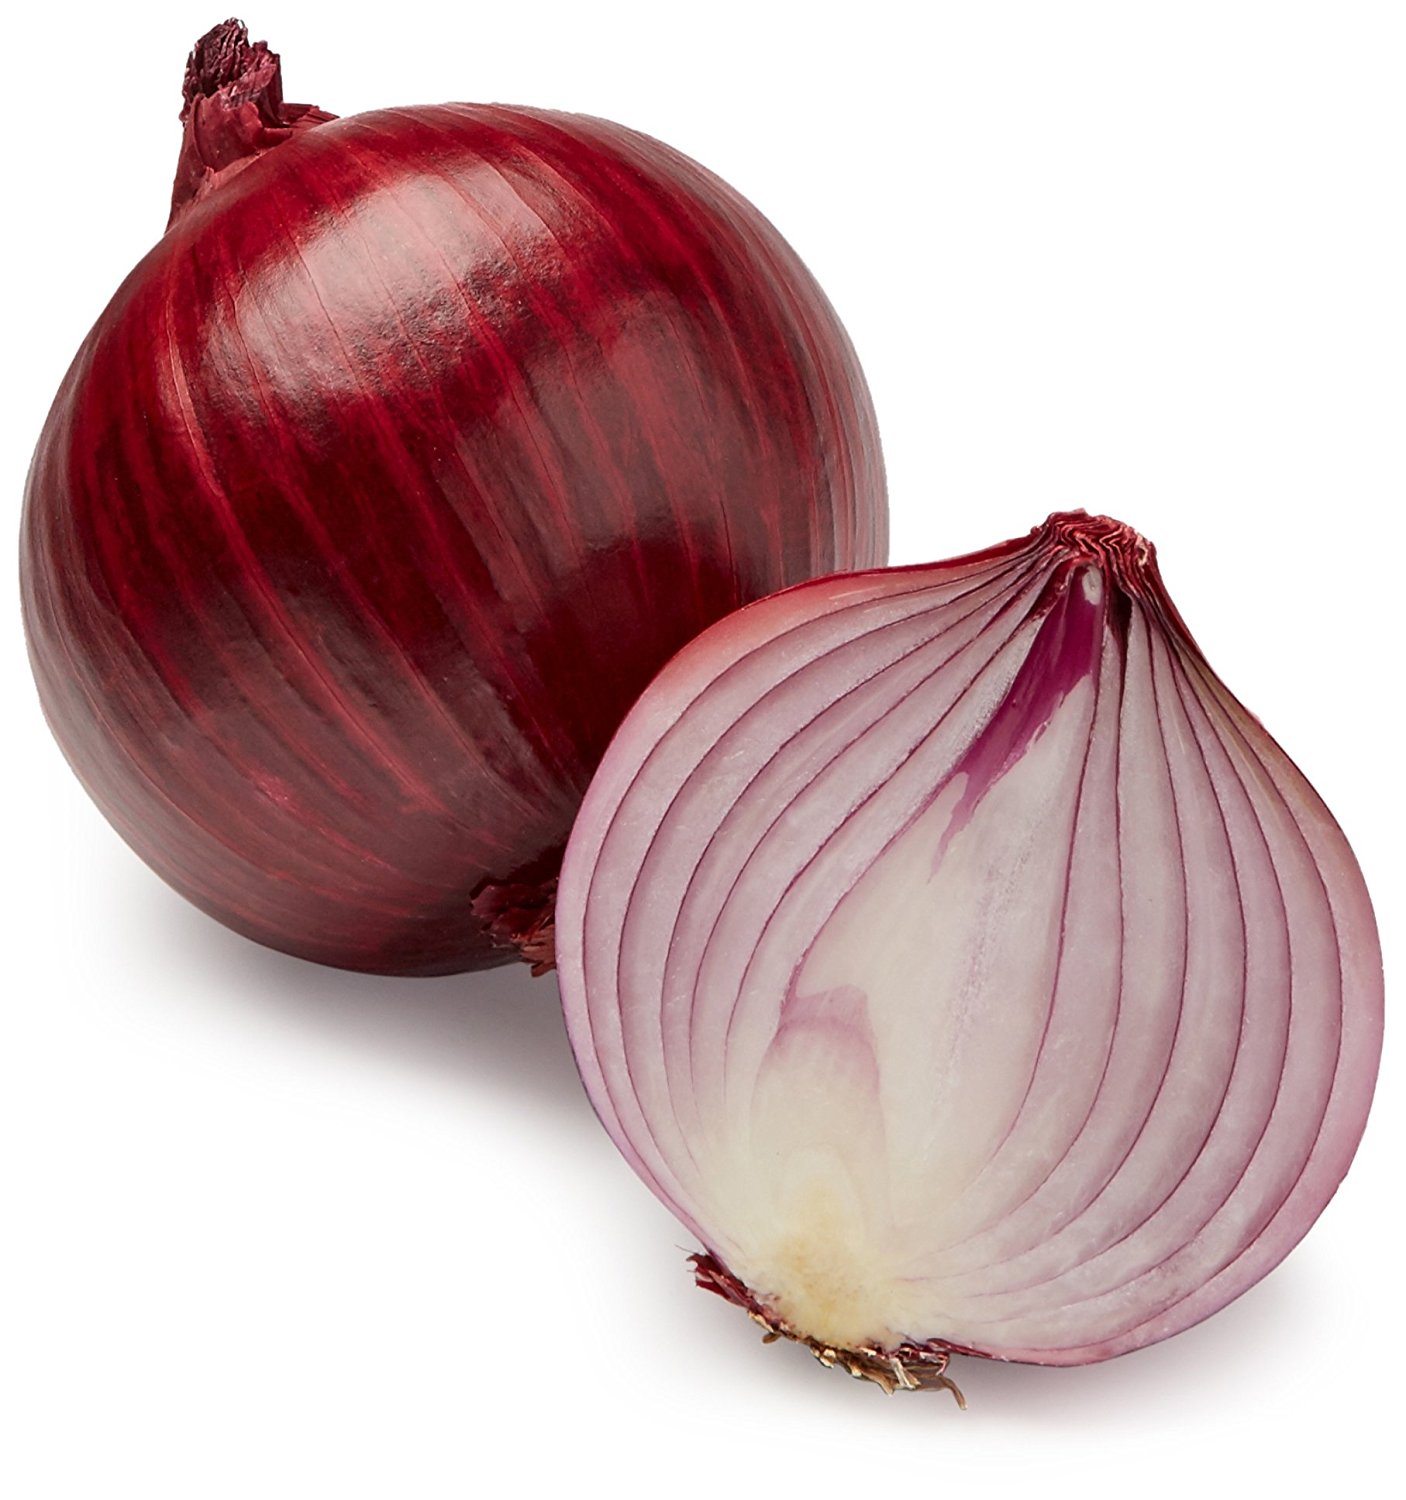 Organic Red Onion, One Large: Amazon.com: Grocery & Gourmet Food